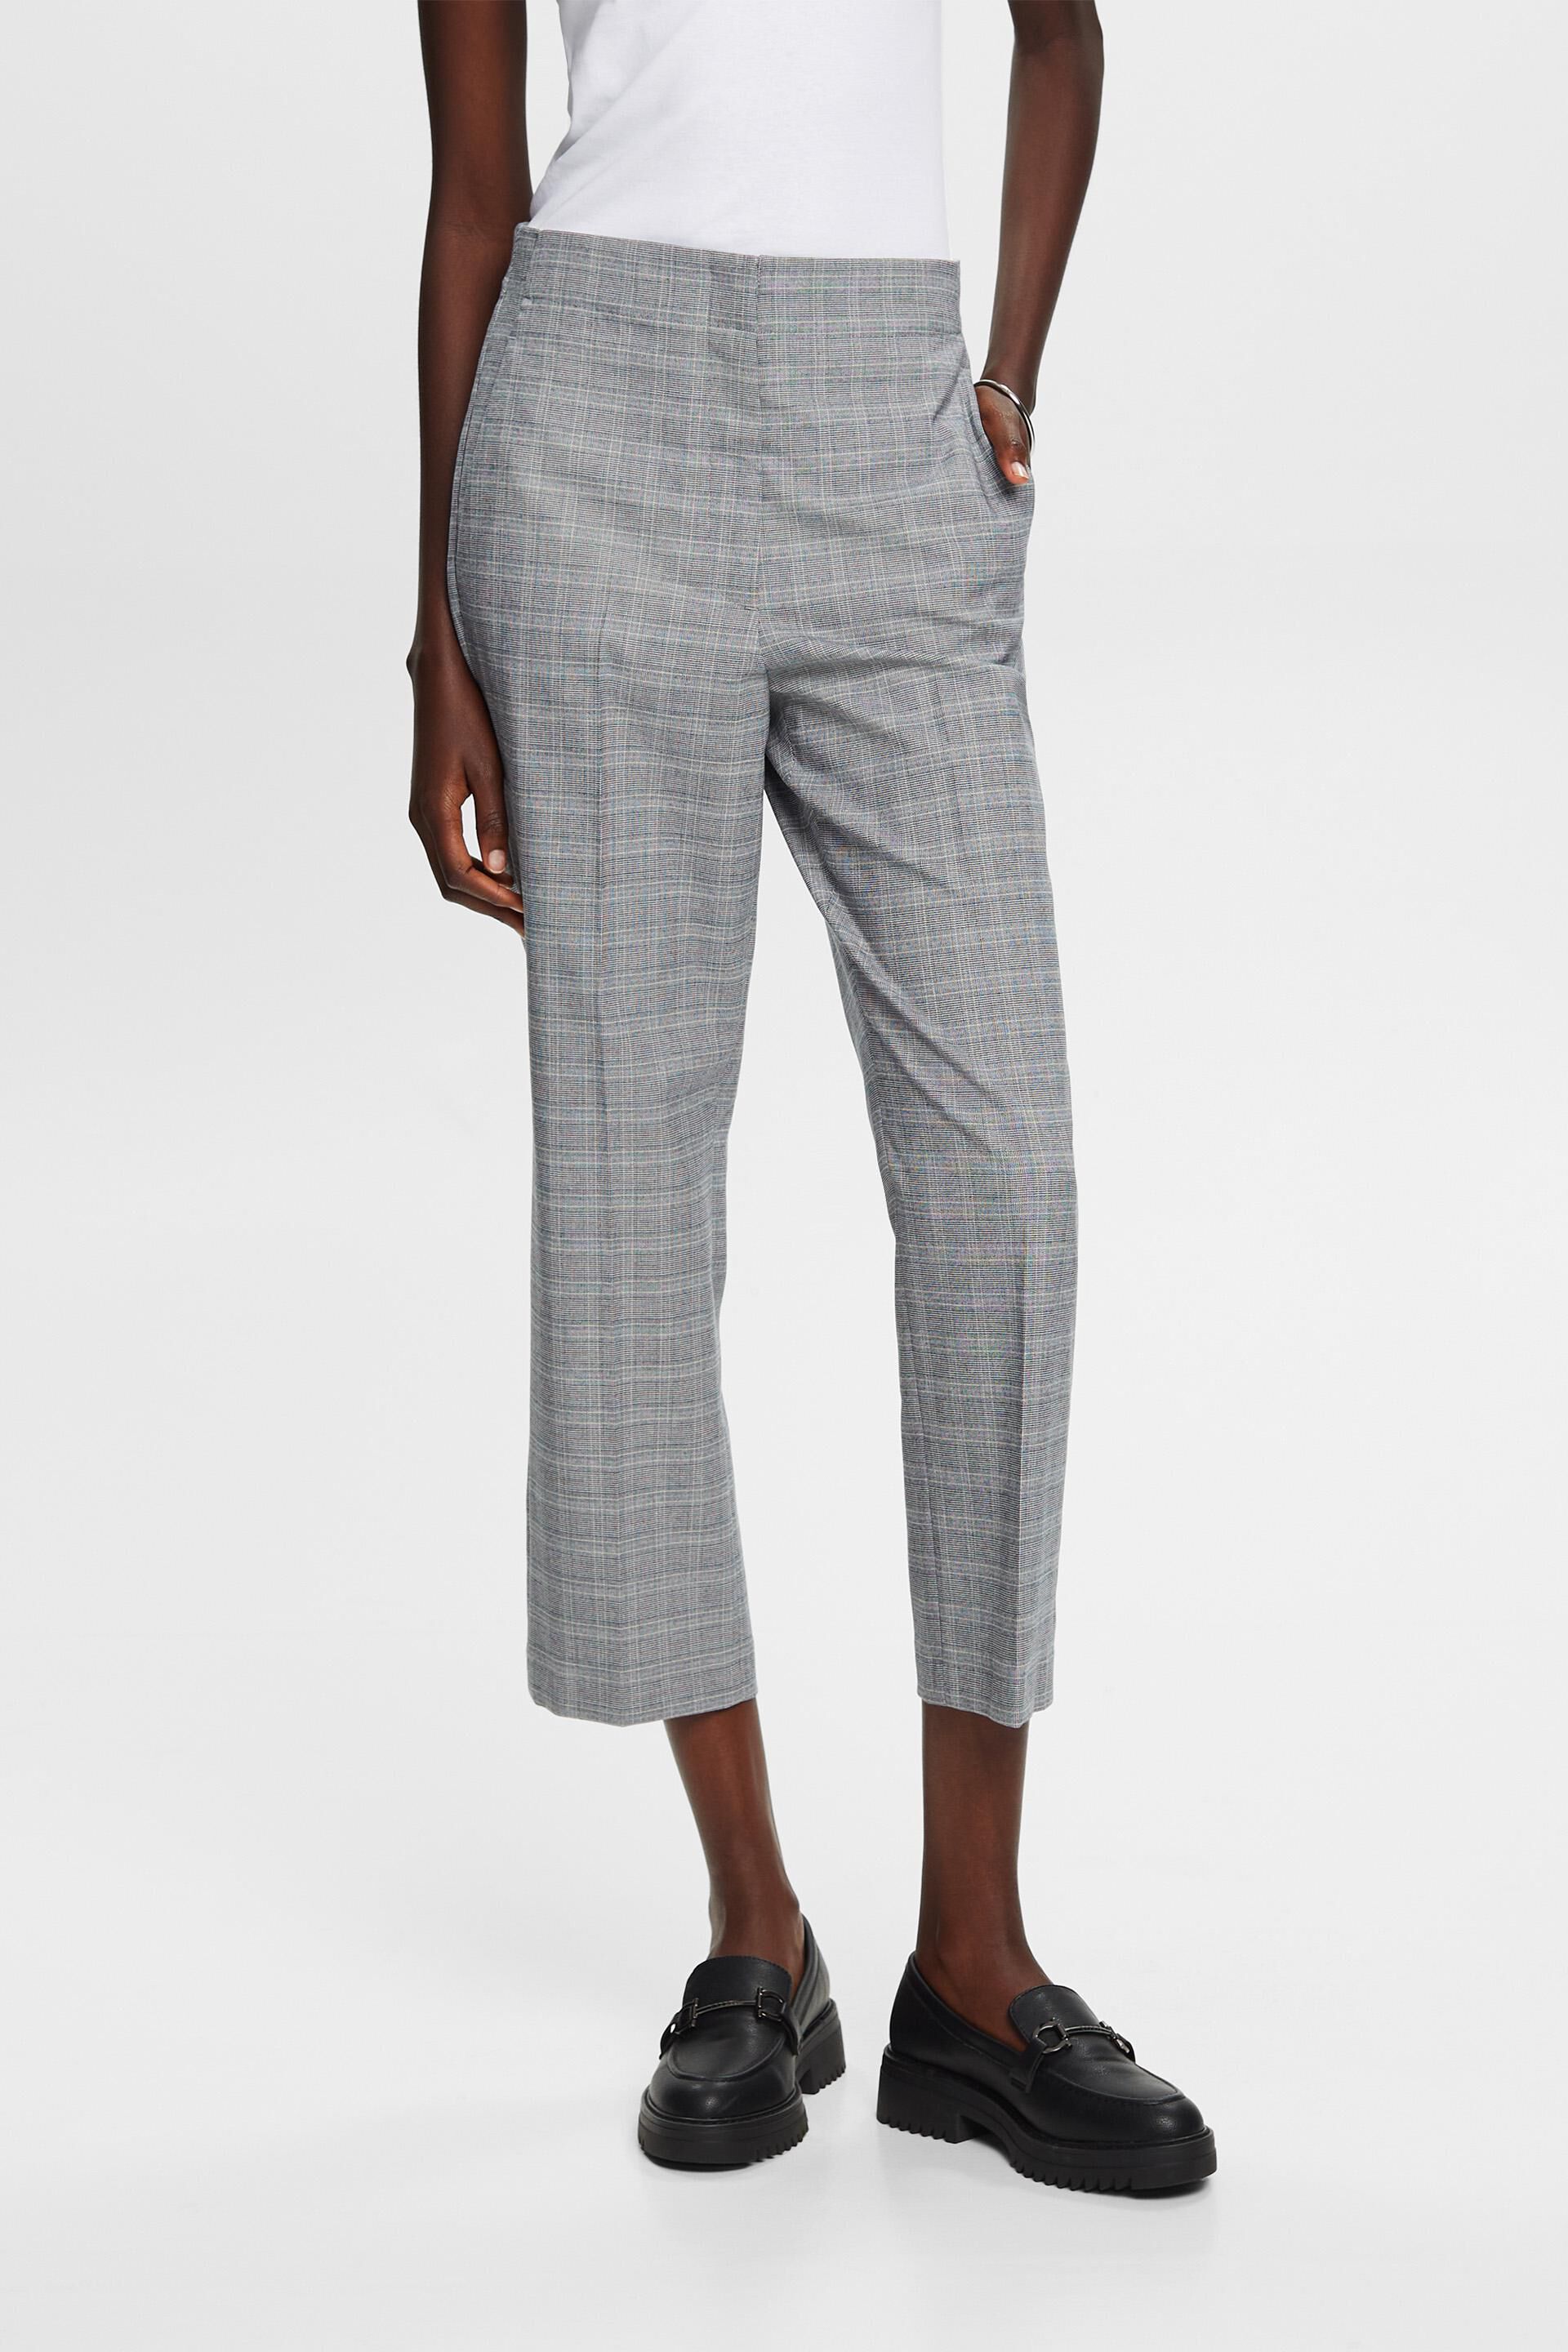 Esprit kick-flare & trousers Match: Mix checked